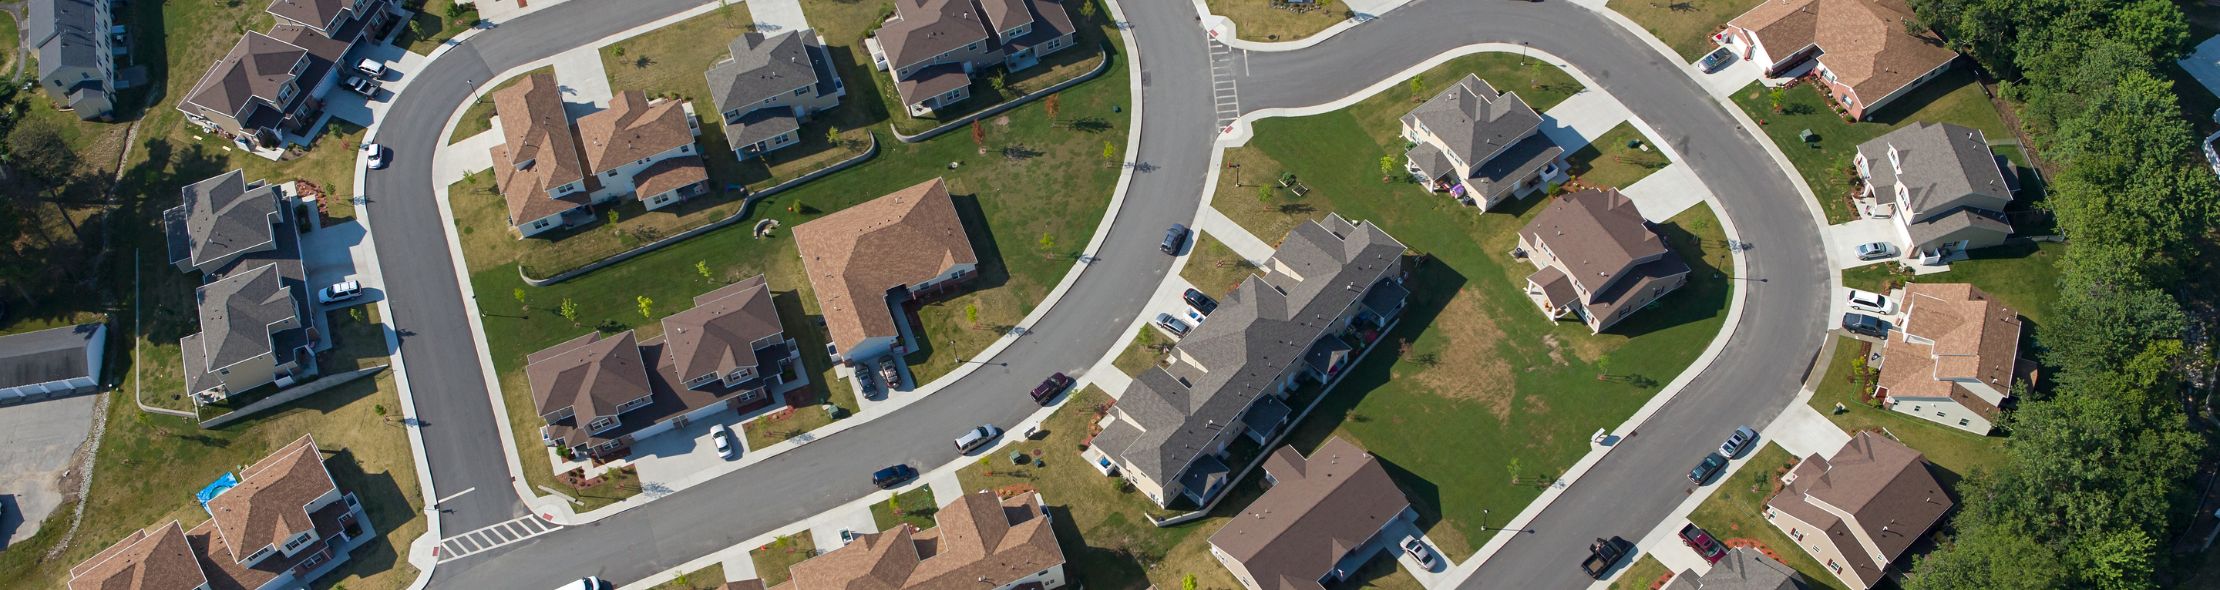 An arial view of a residential subdivision.